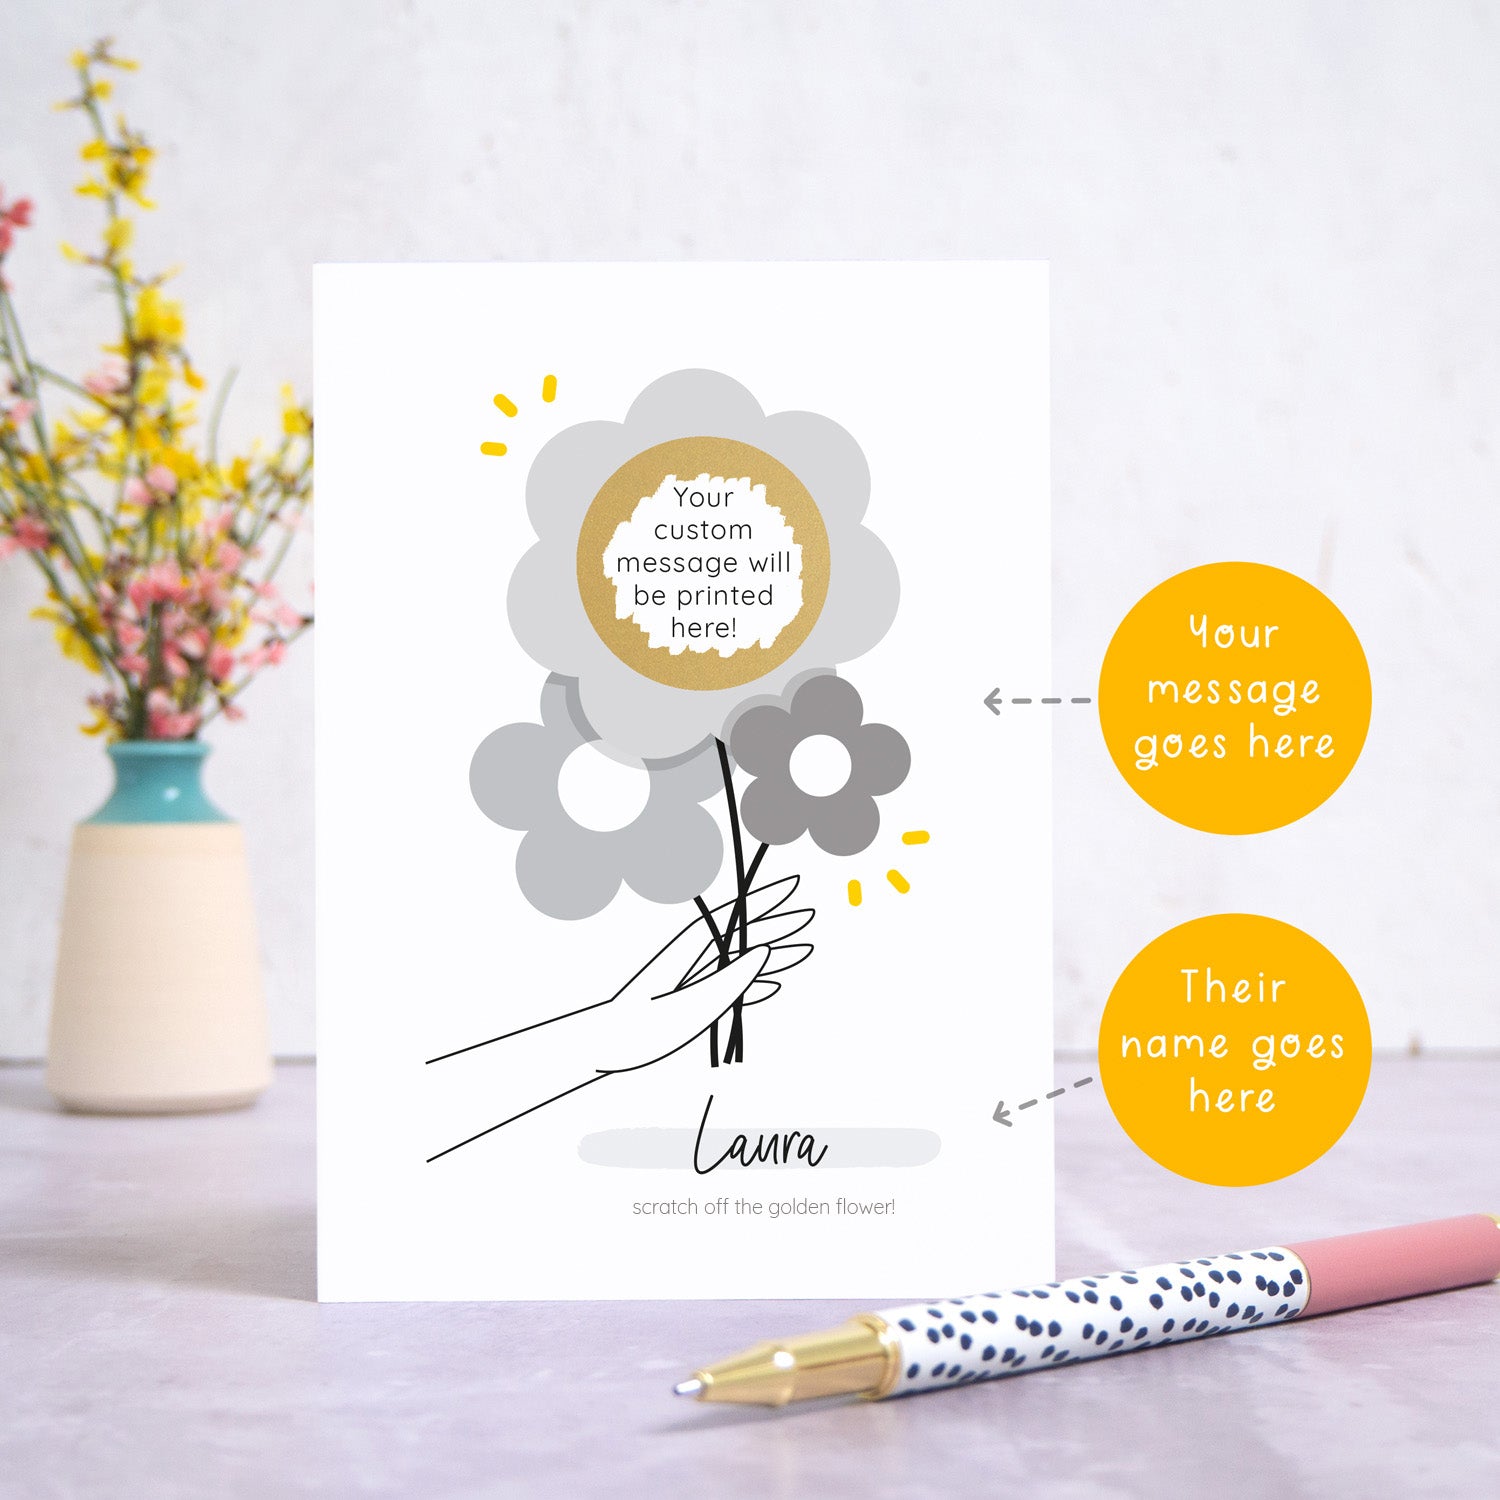 The scratch and reveal card has been photographed standing up on top of a grey surface. There is a small jar of flowers in the background and a pen in the foreground. To the right of the card are two circles which point to the areas that can be personalised. These are the name and the scratch off message. The gold circle has been scratched off to reveal the custom text.